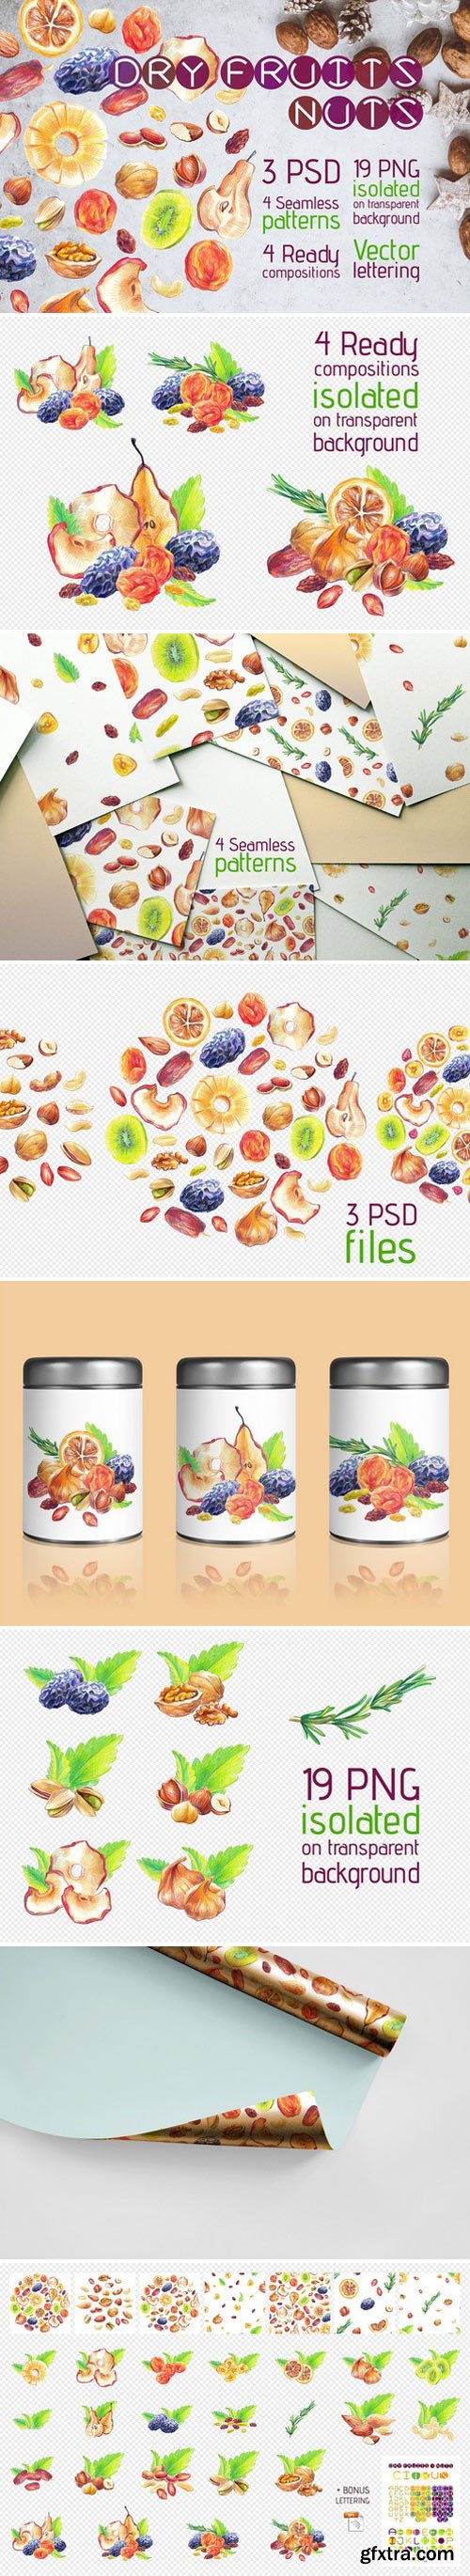 CM - Dry Fruits and Nuts Big Set 2256854